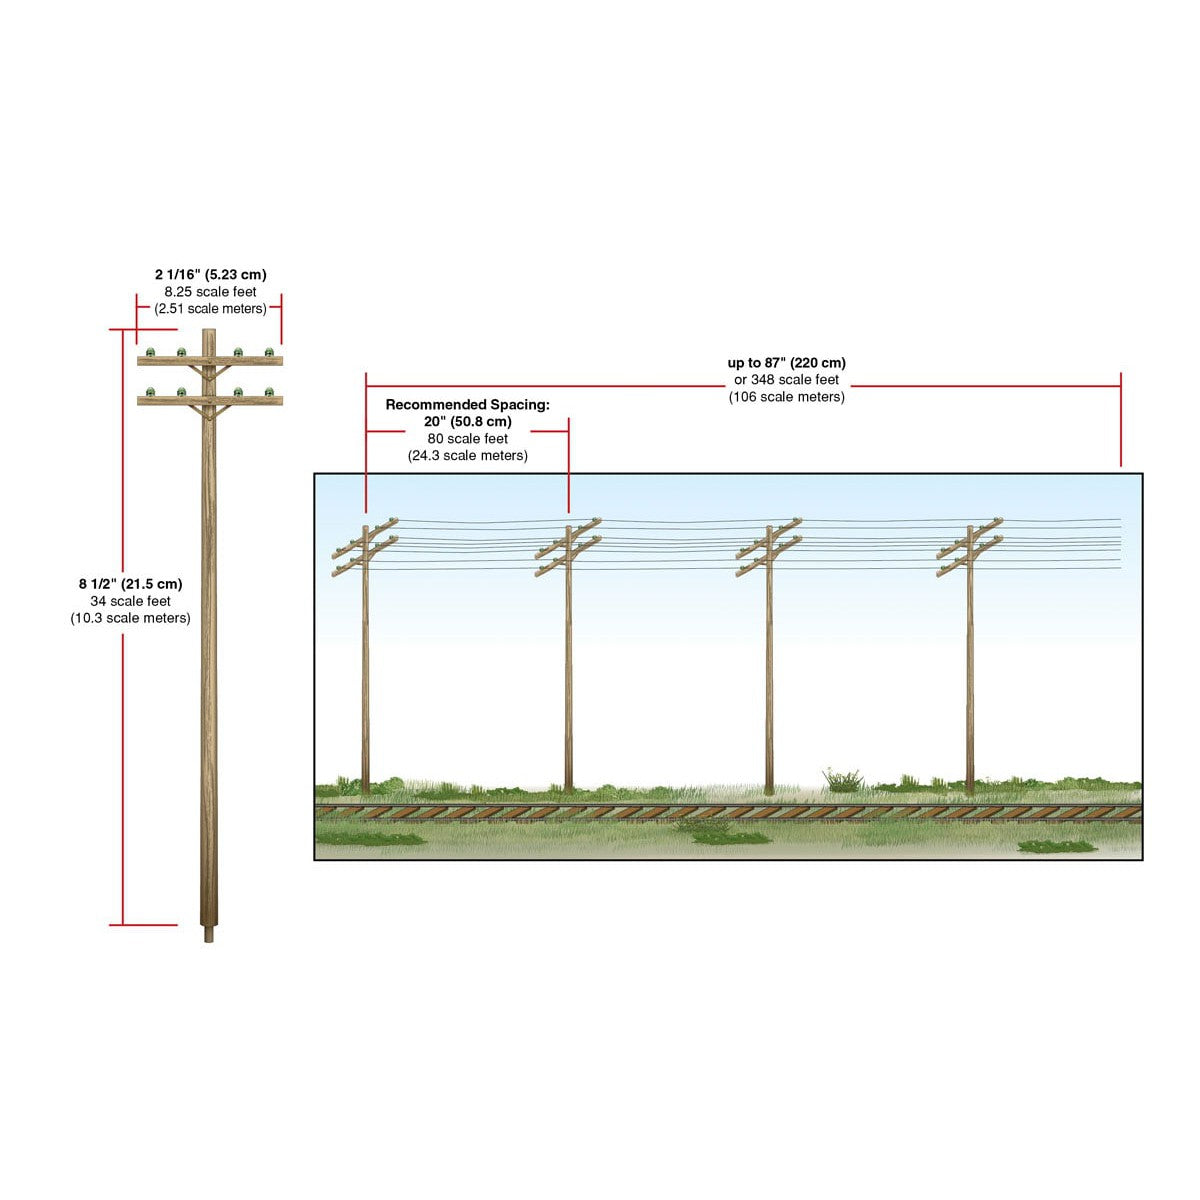 Woodland Scenics O Scale Pre-Wired Poles Double Crossbar Power Lines